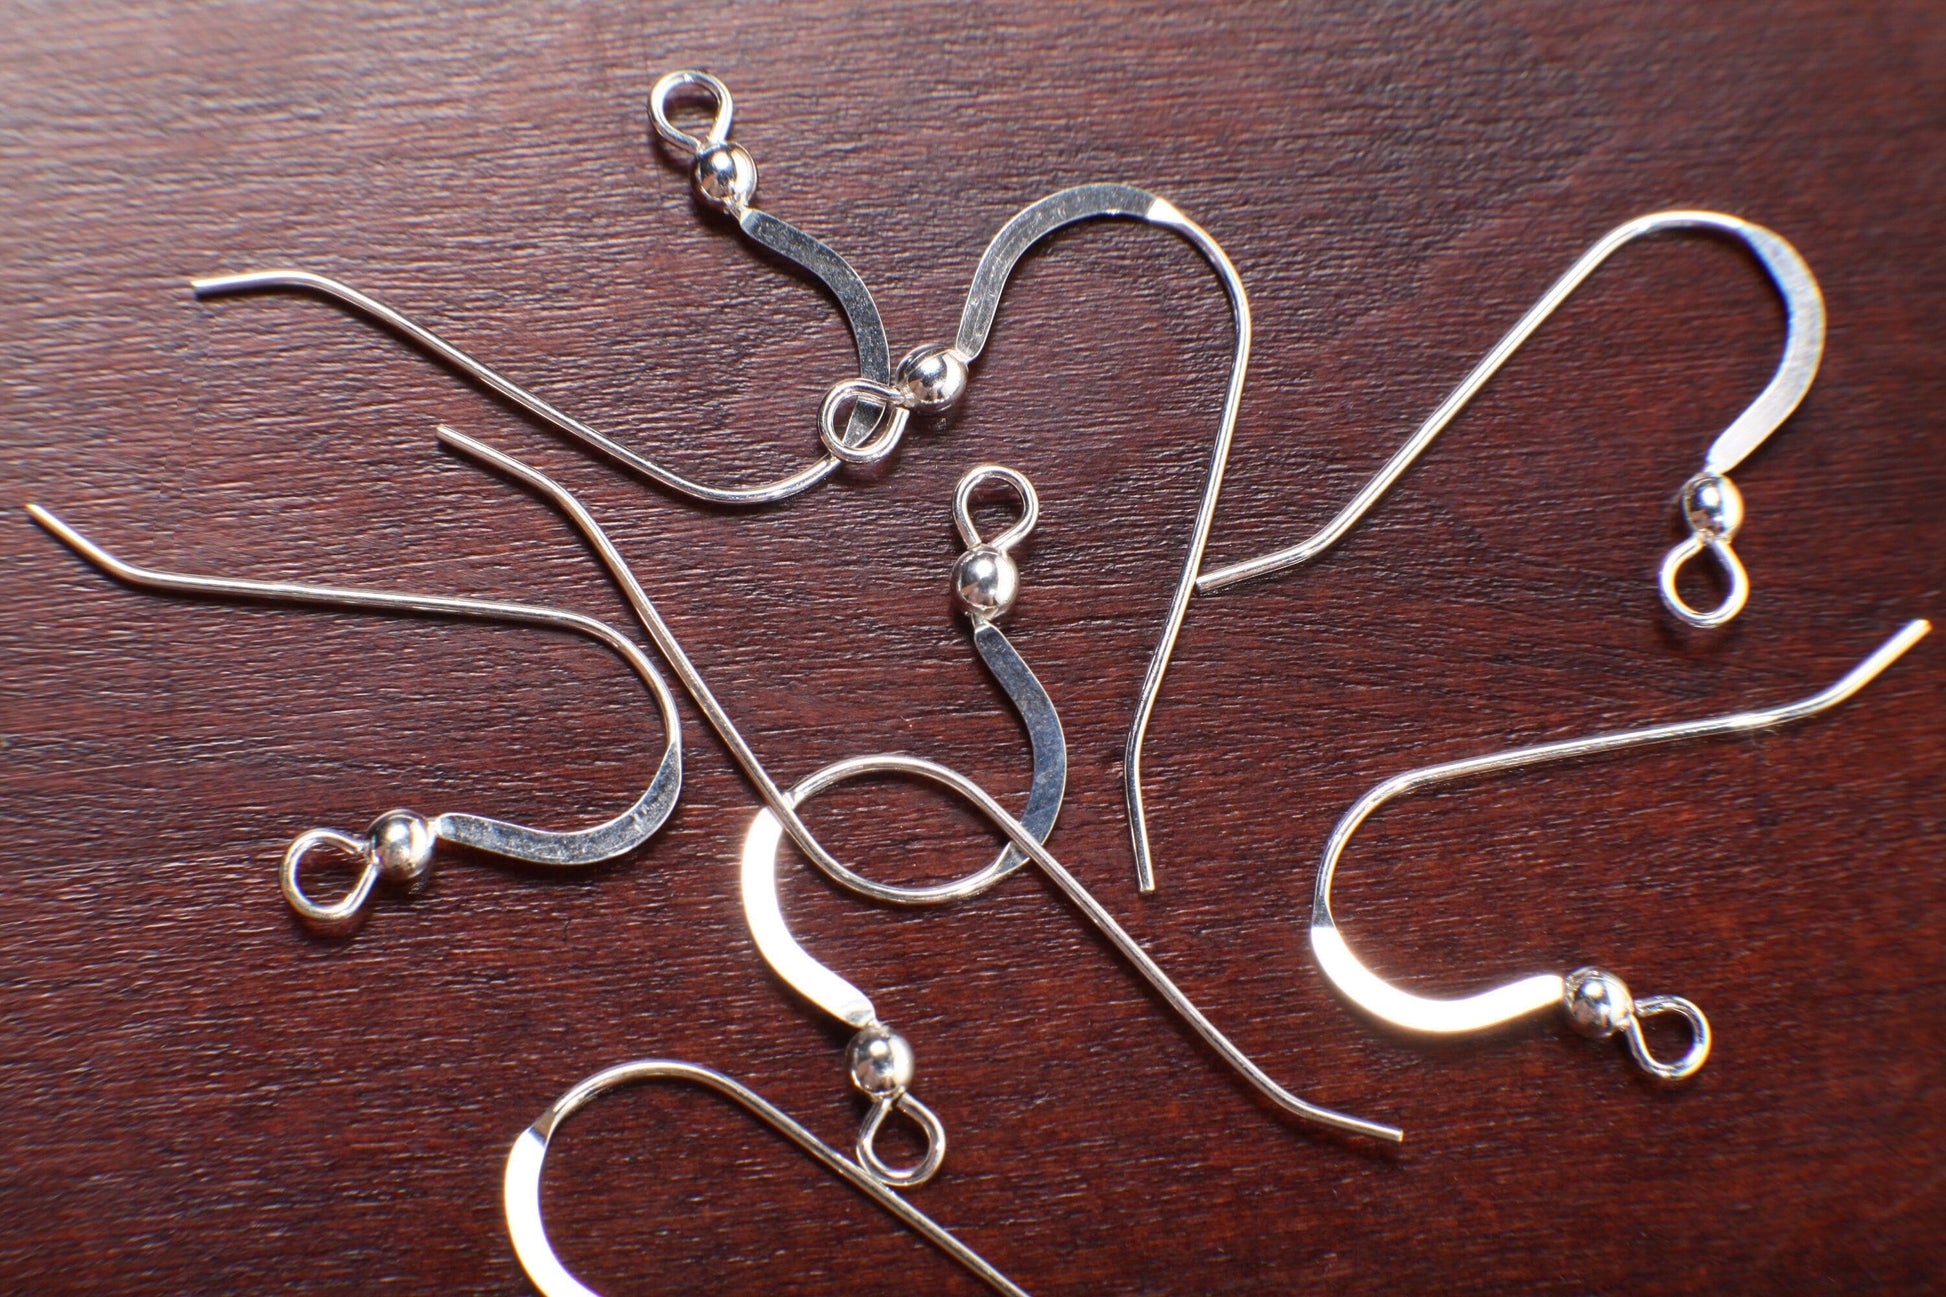 925 sterling silver 25mm Long French Hook Earwire with 2.5mm Ball, 925 stamped Jewelry Making Italian Findings, 10/20/50 Pieces